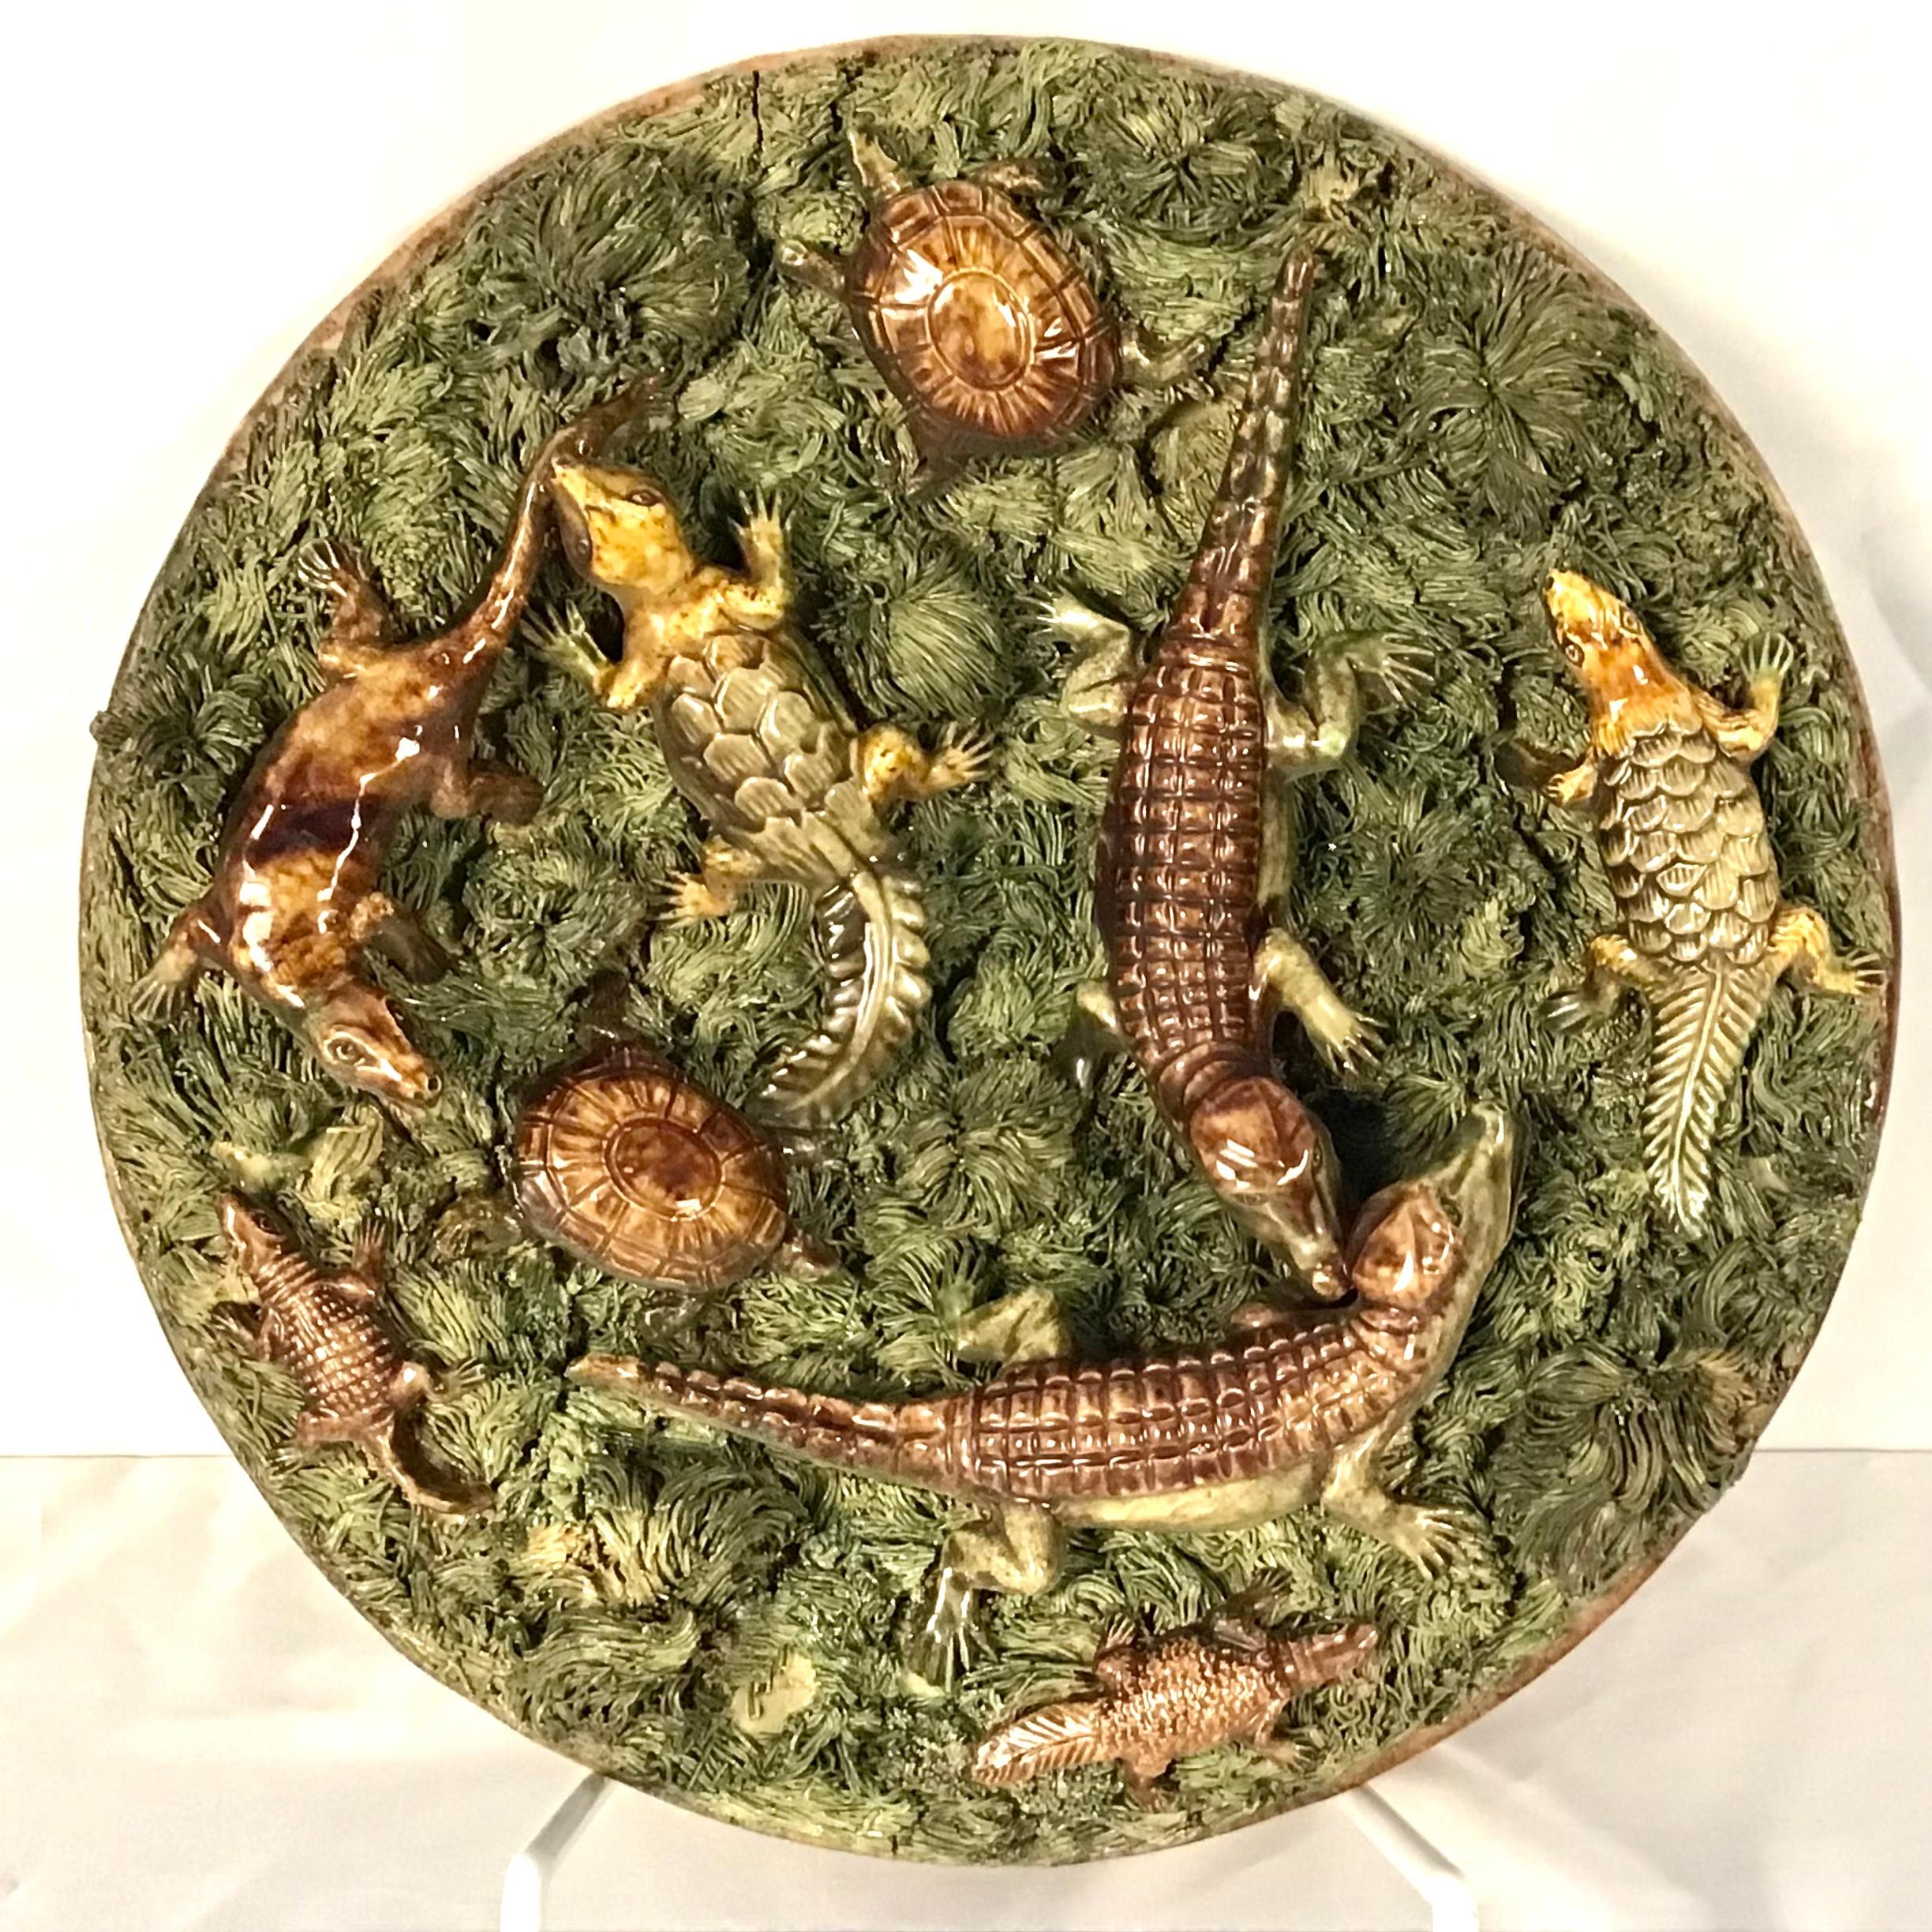 19th century Portuguese Palissy plate with large alligators, lizards and turtles searching through mossy tuft. Indecipherable mark, probably Mafra, Caldas.